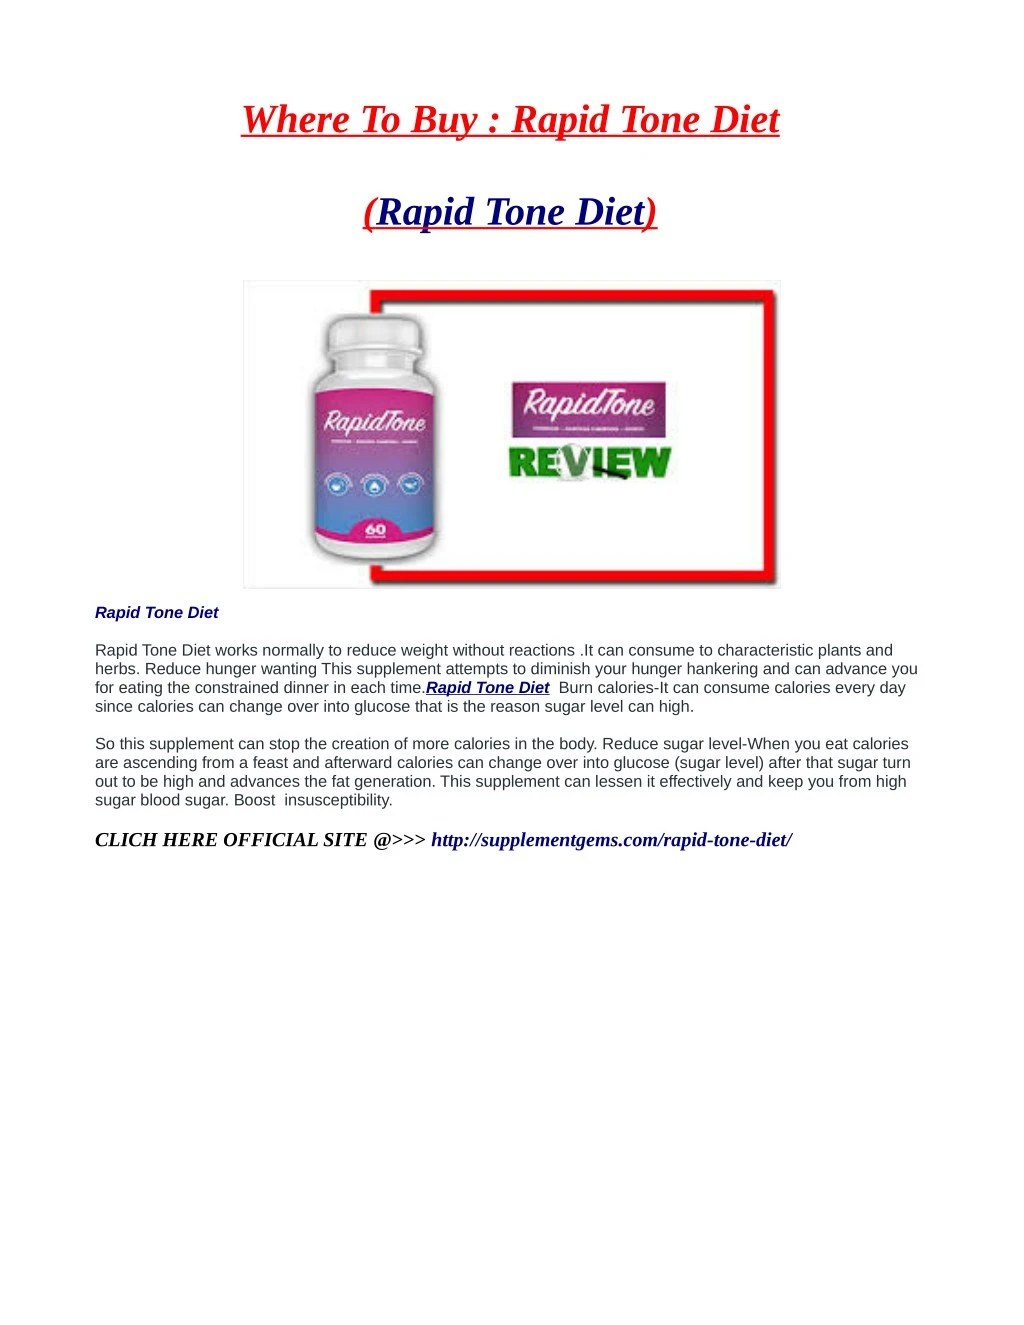 where to buy rapid tone diet